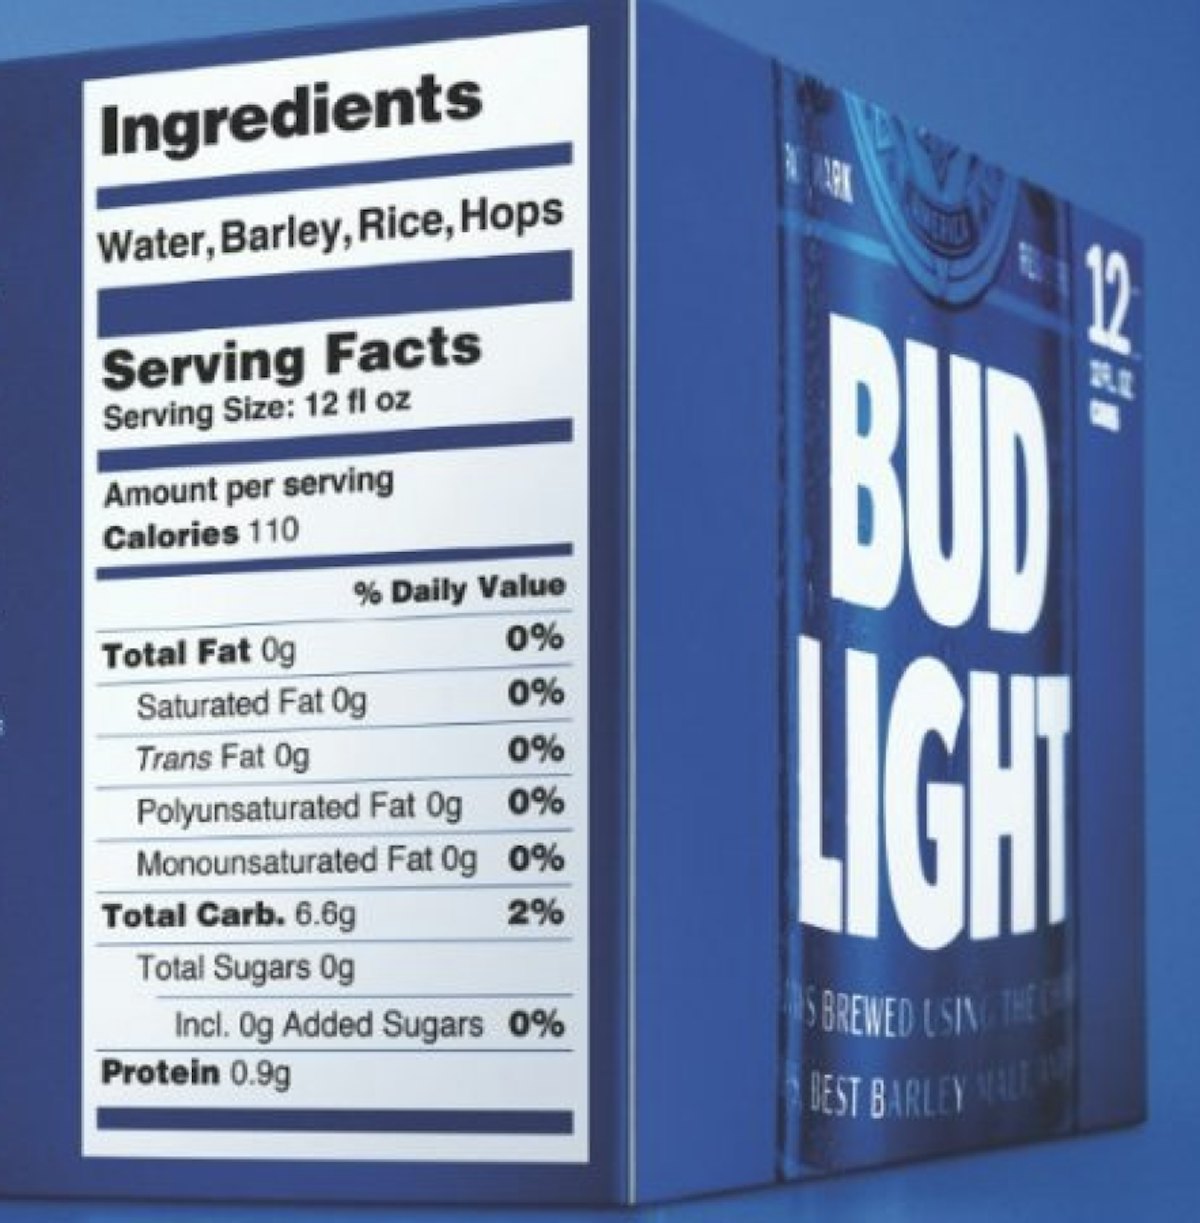 Bud Light first beer to add ingredient label | ProFood World